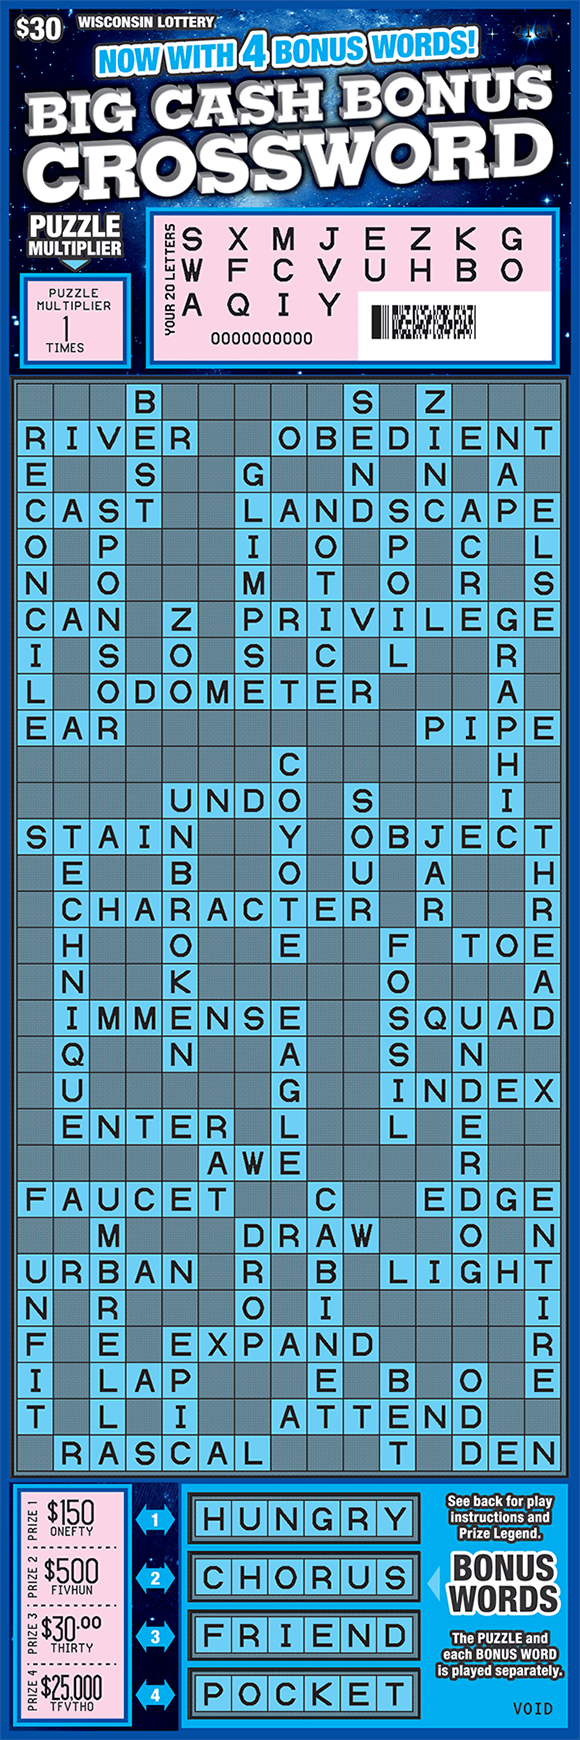 image of scratch ticket with a deep blue background and a light gray crossword grid and light blue boxes on the crossword grid on scratch ticket from wisconsin lottery